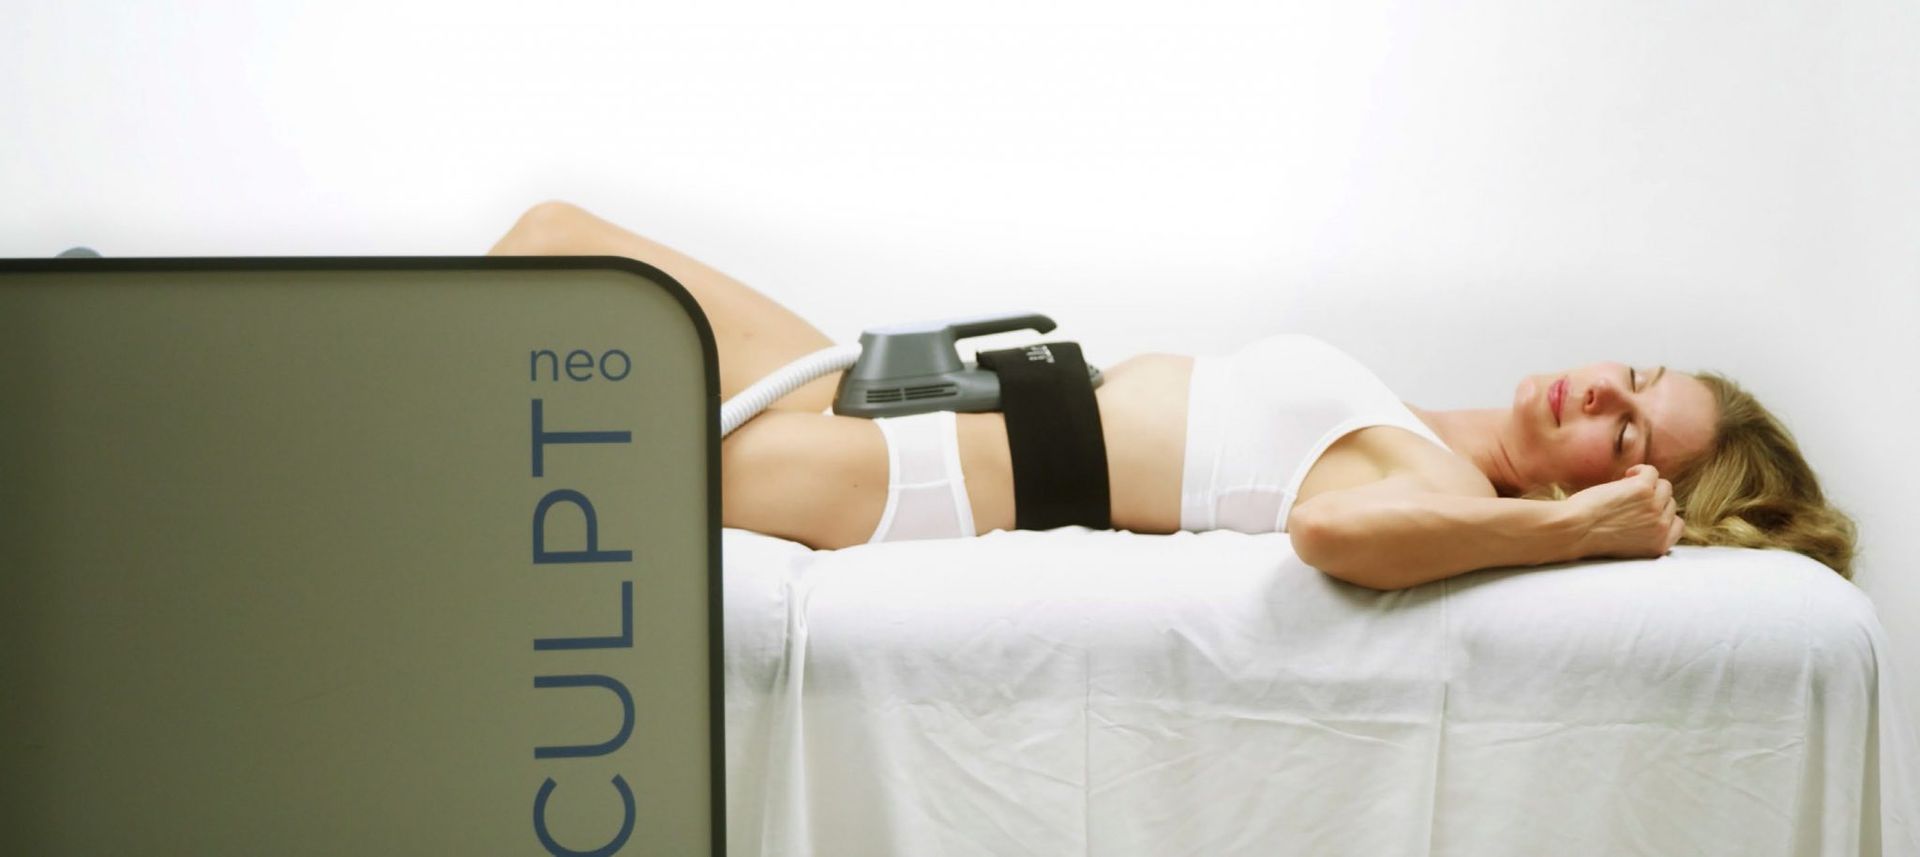 A woman is laying on a bed with a device that says sculpt on it